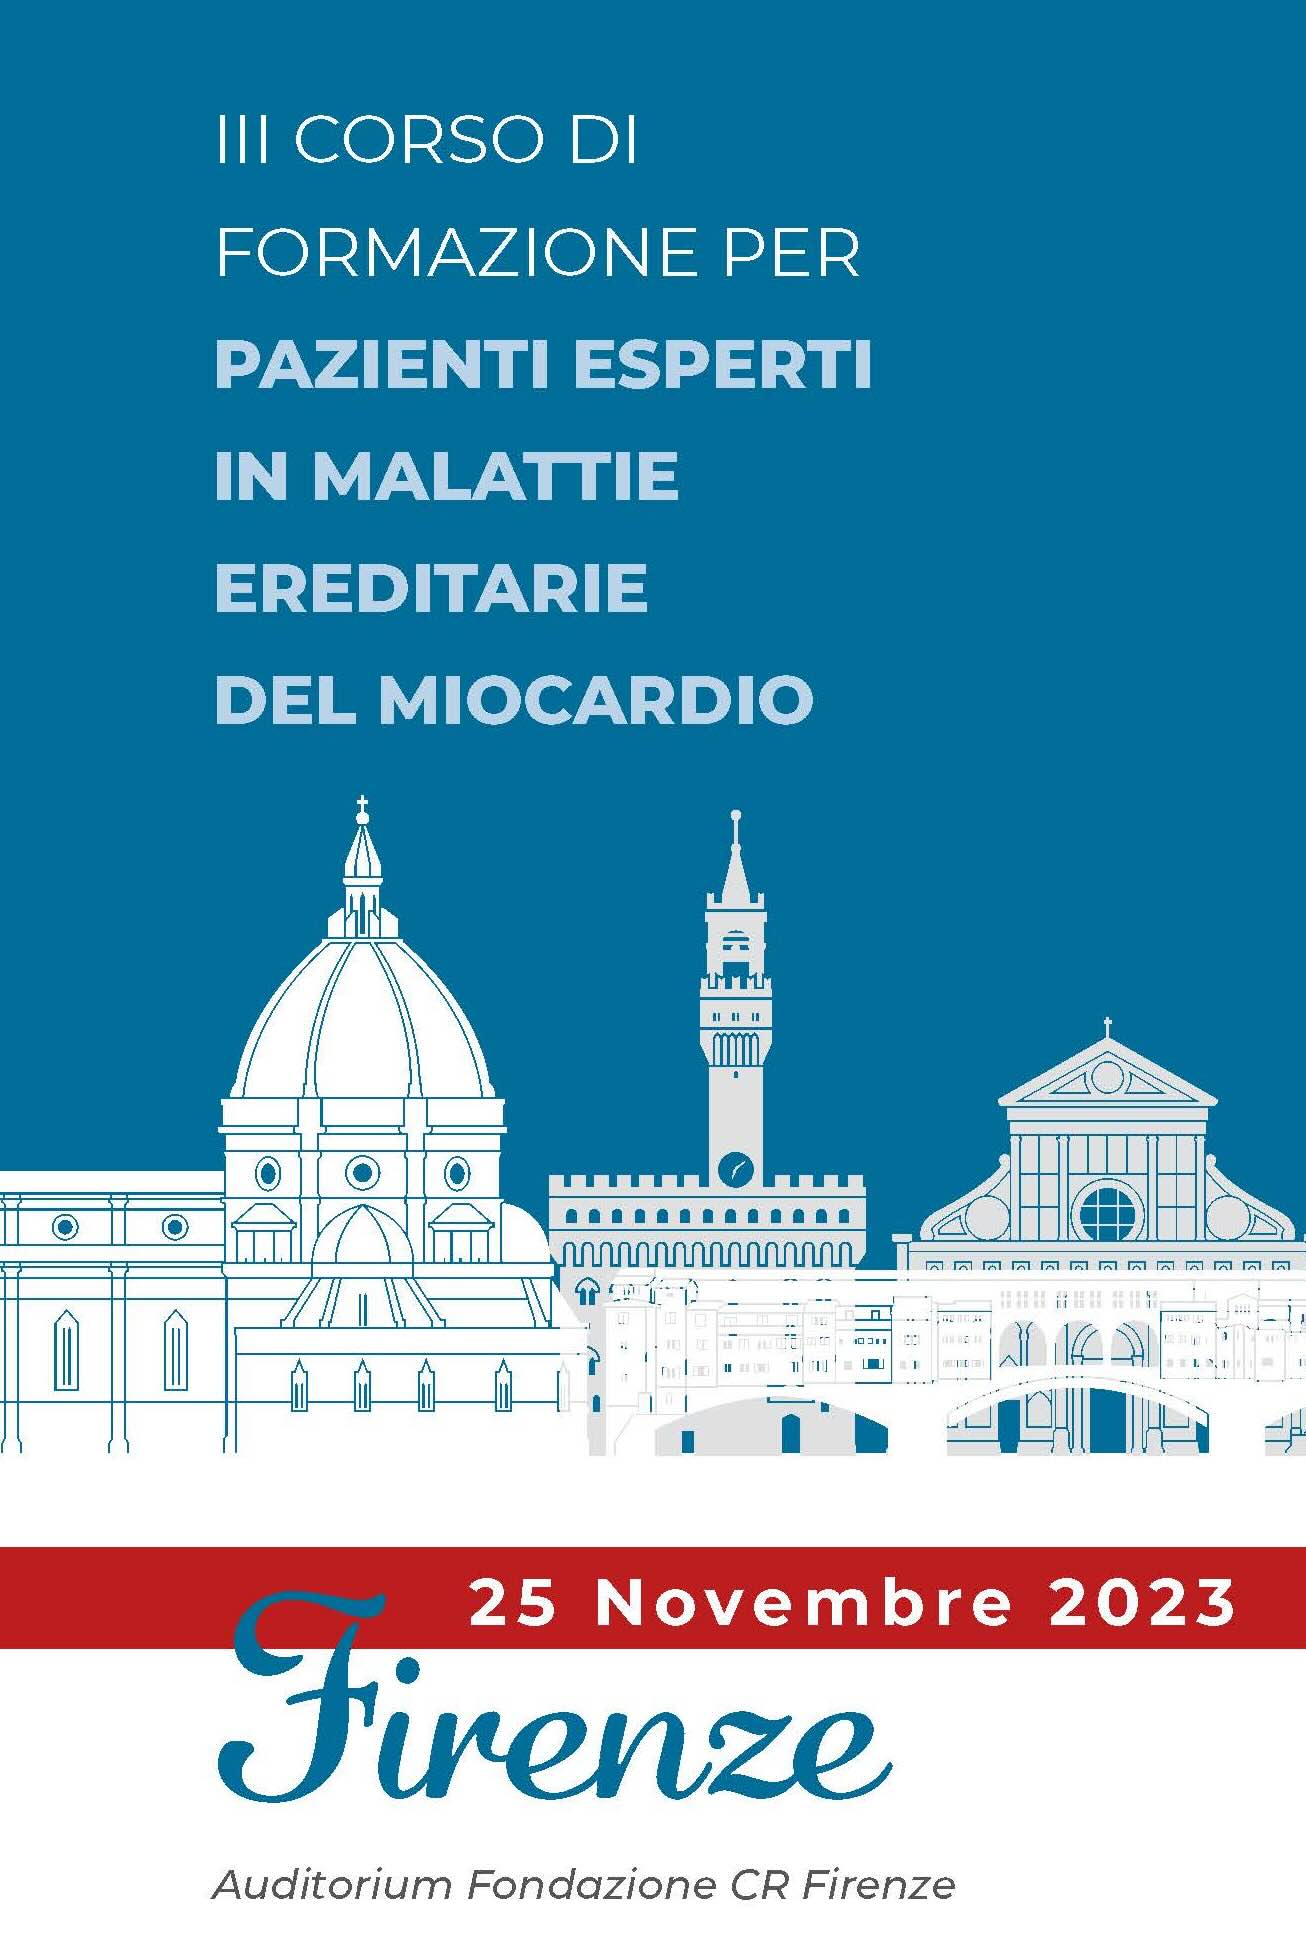 Florence training course flyer 2023